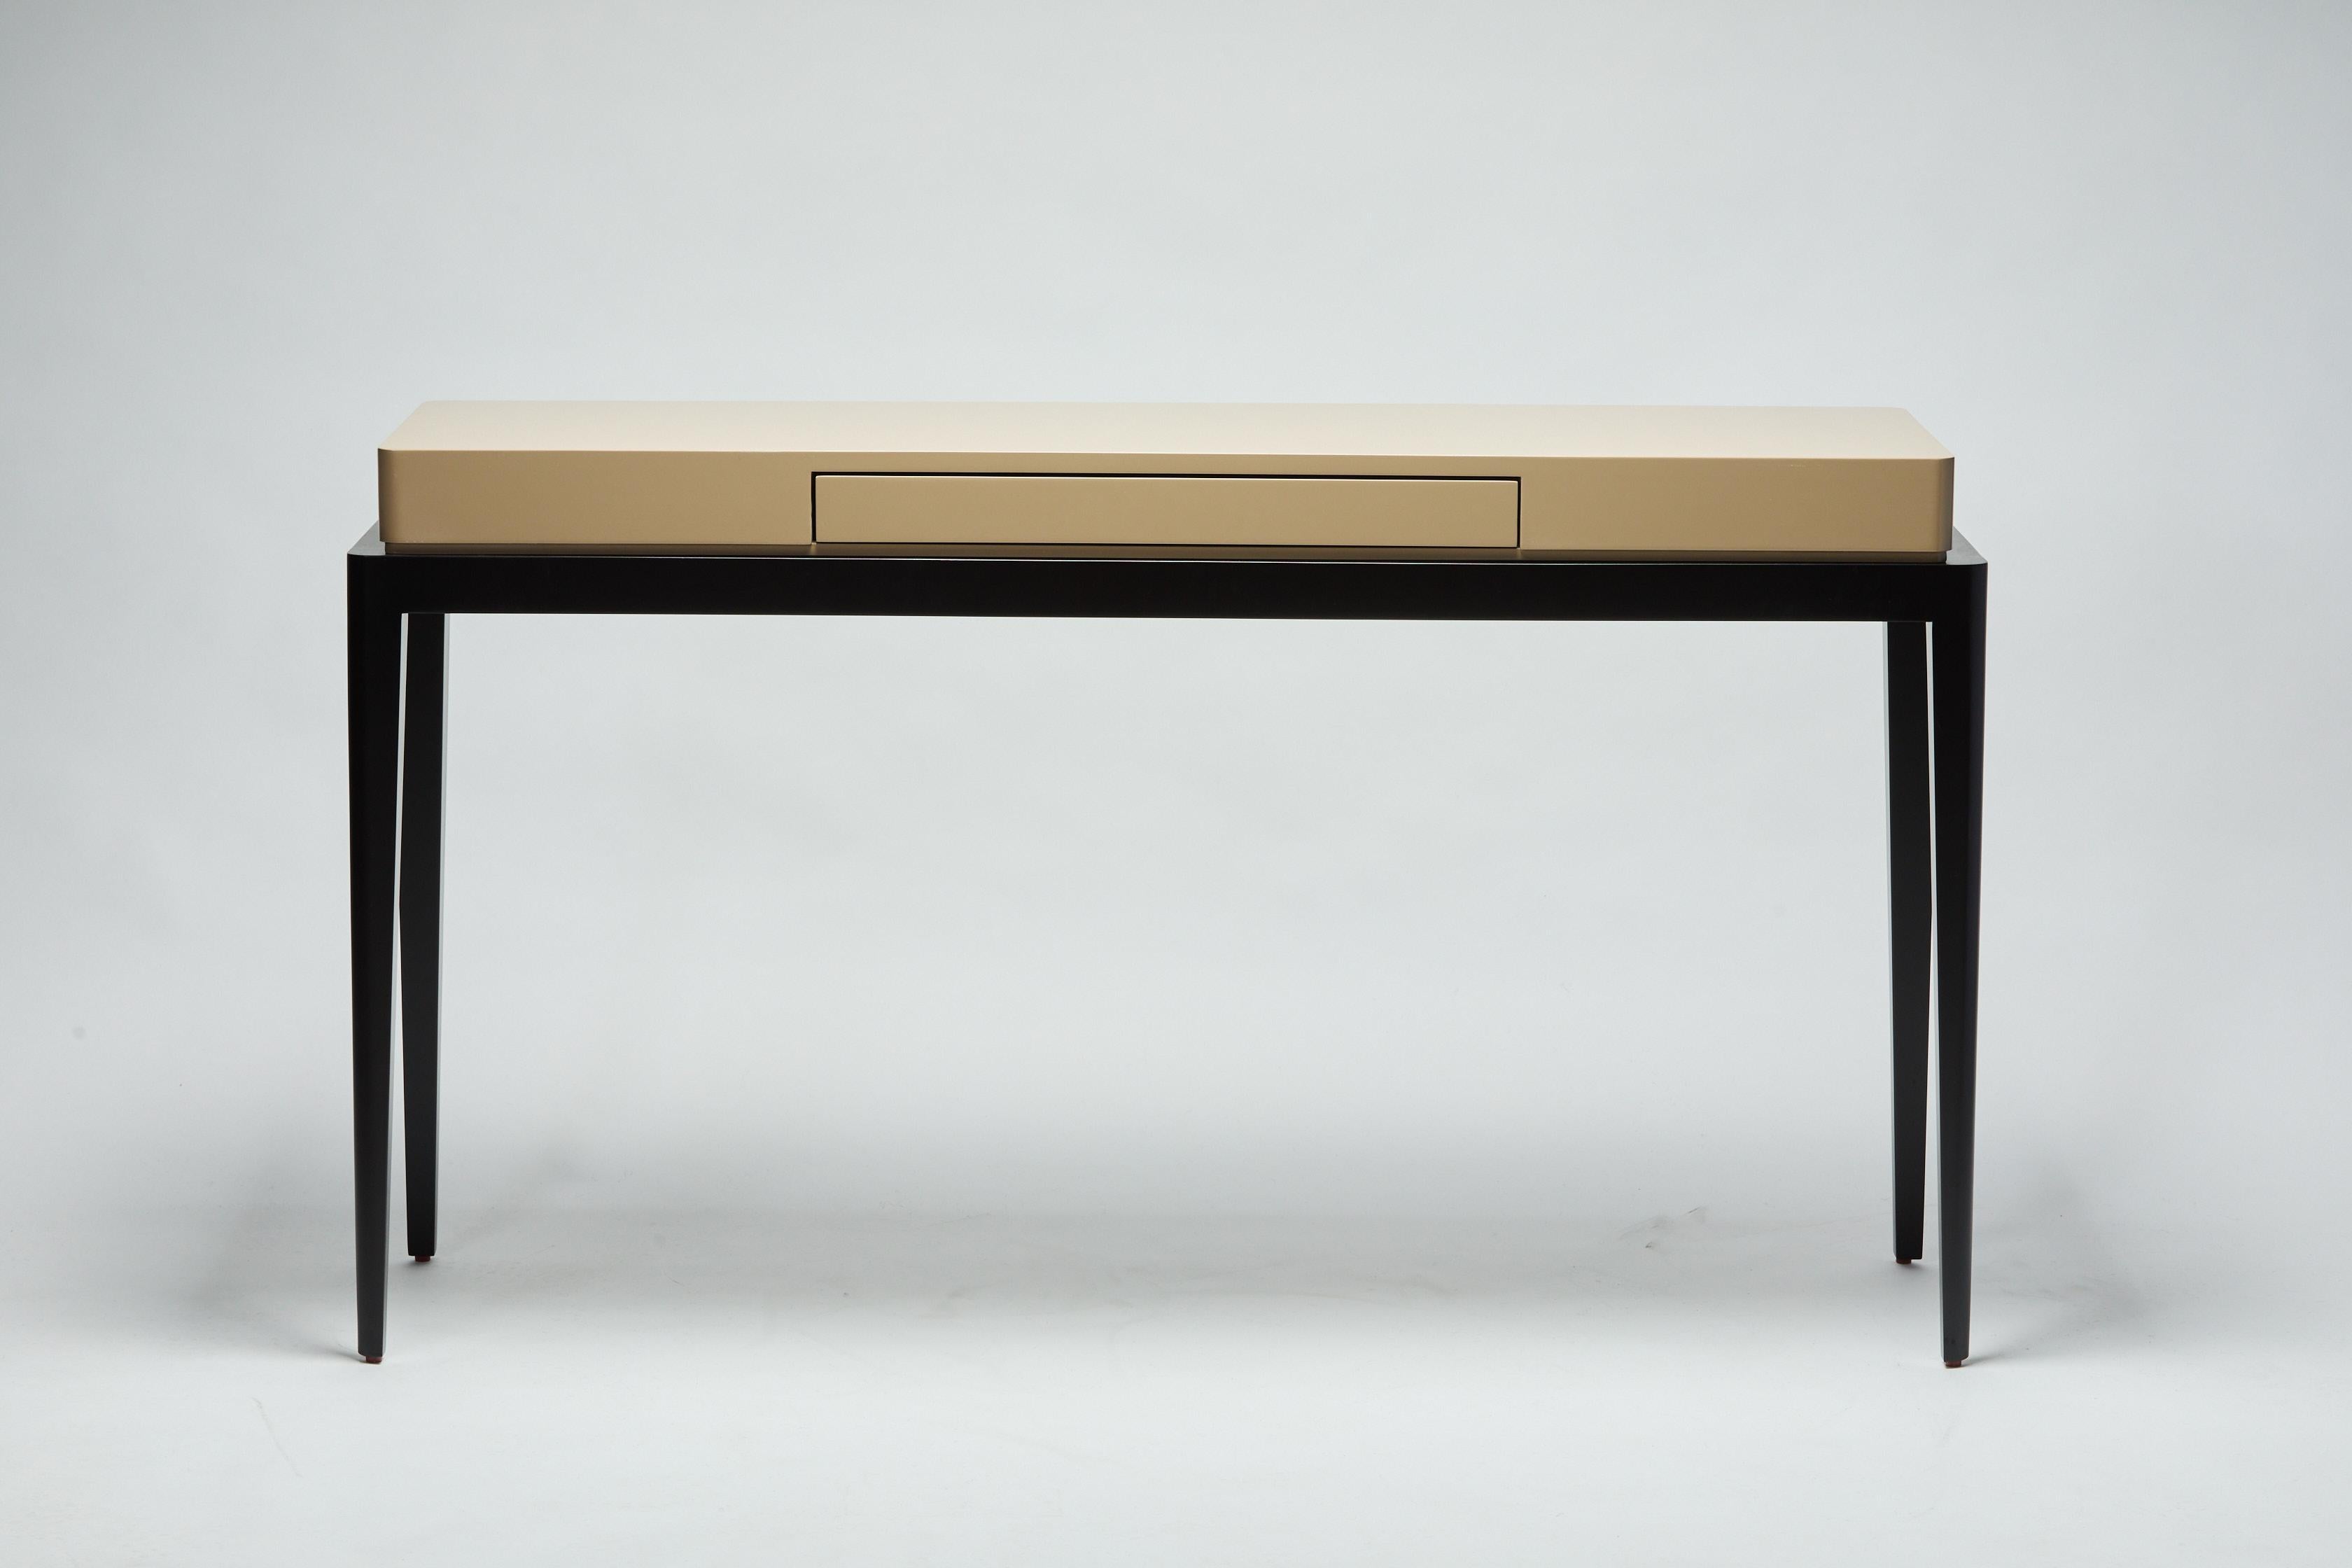 The perfect console; Size : 160cm
Flat surface, smooth, purity of the line only asking to be inhabited. If it is a
console or a desk, TARA is a piece that distinguish itself with the power of its
minimalism. It is enough to dress up any interior.